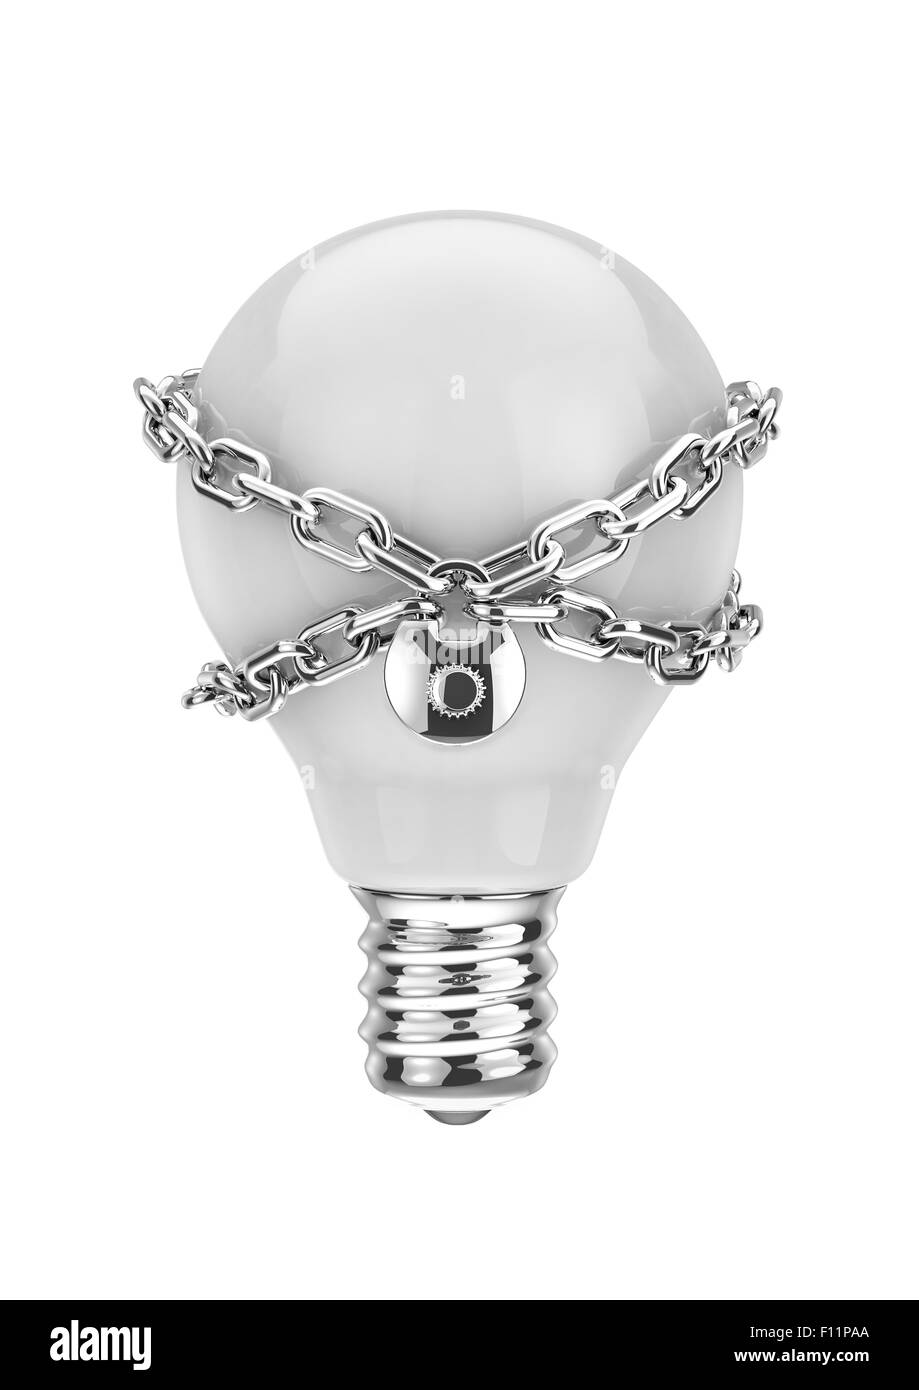 Intellectual property, 3D render of light bulb with lock and chain Stock Photo